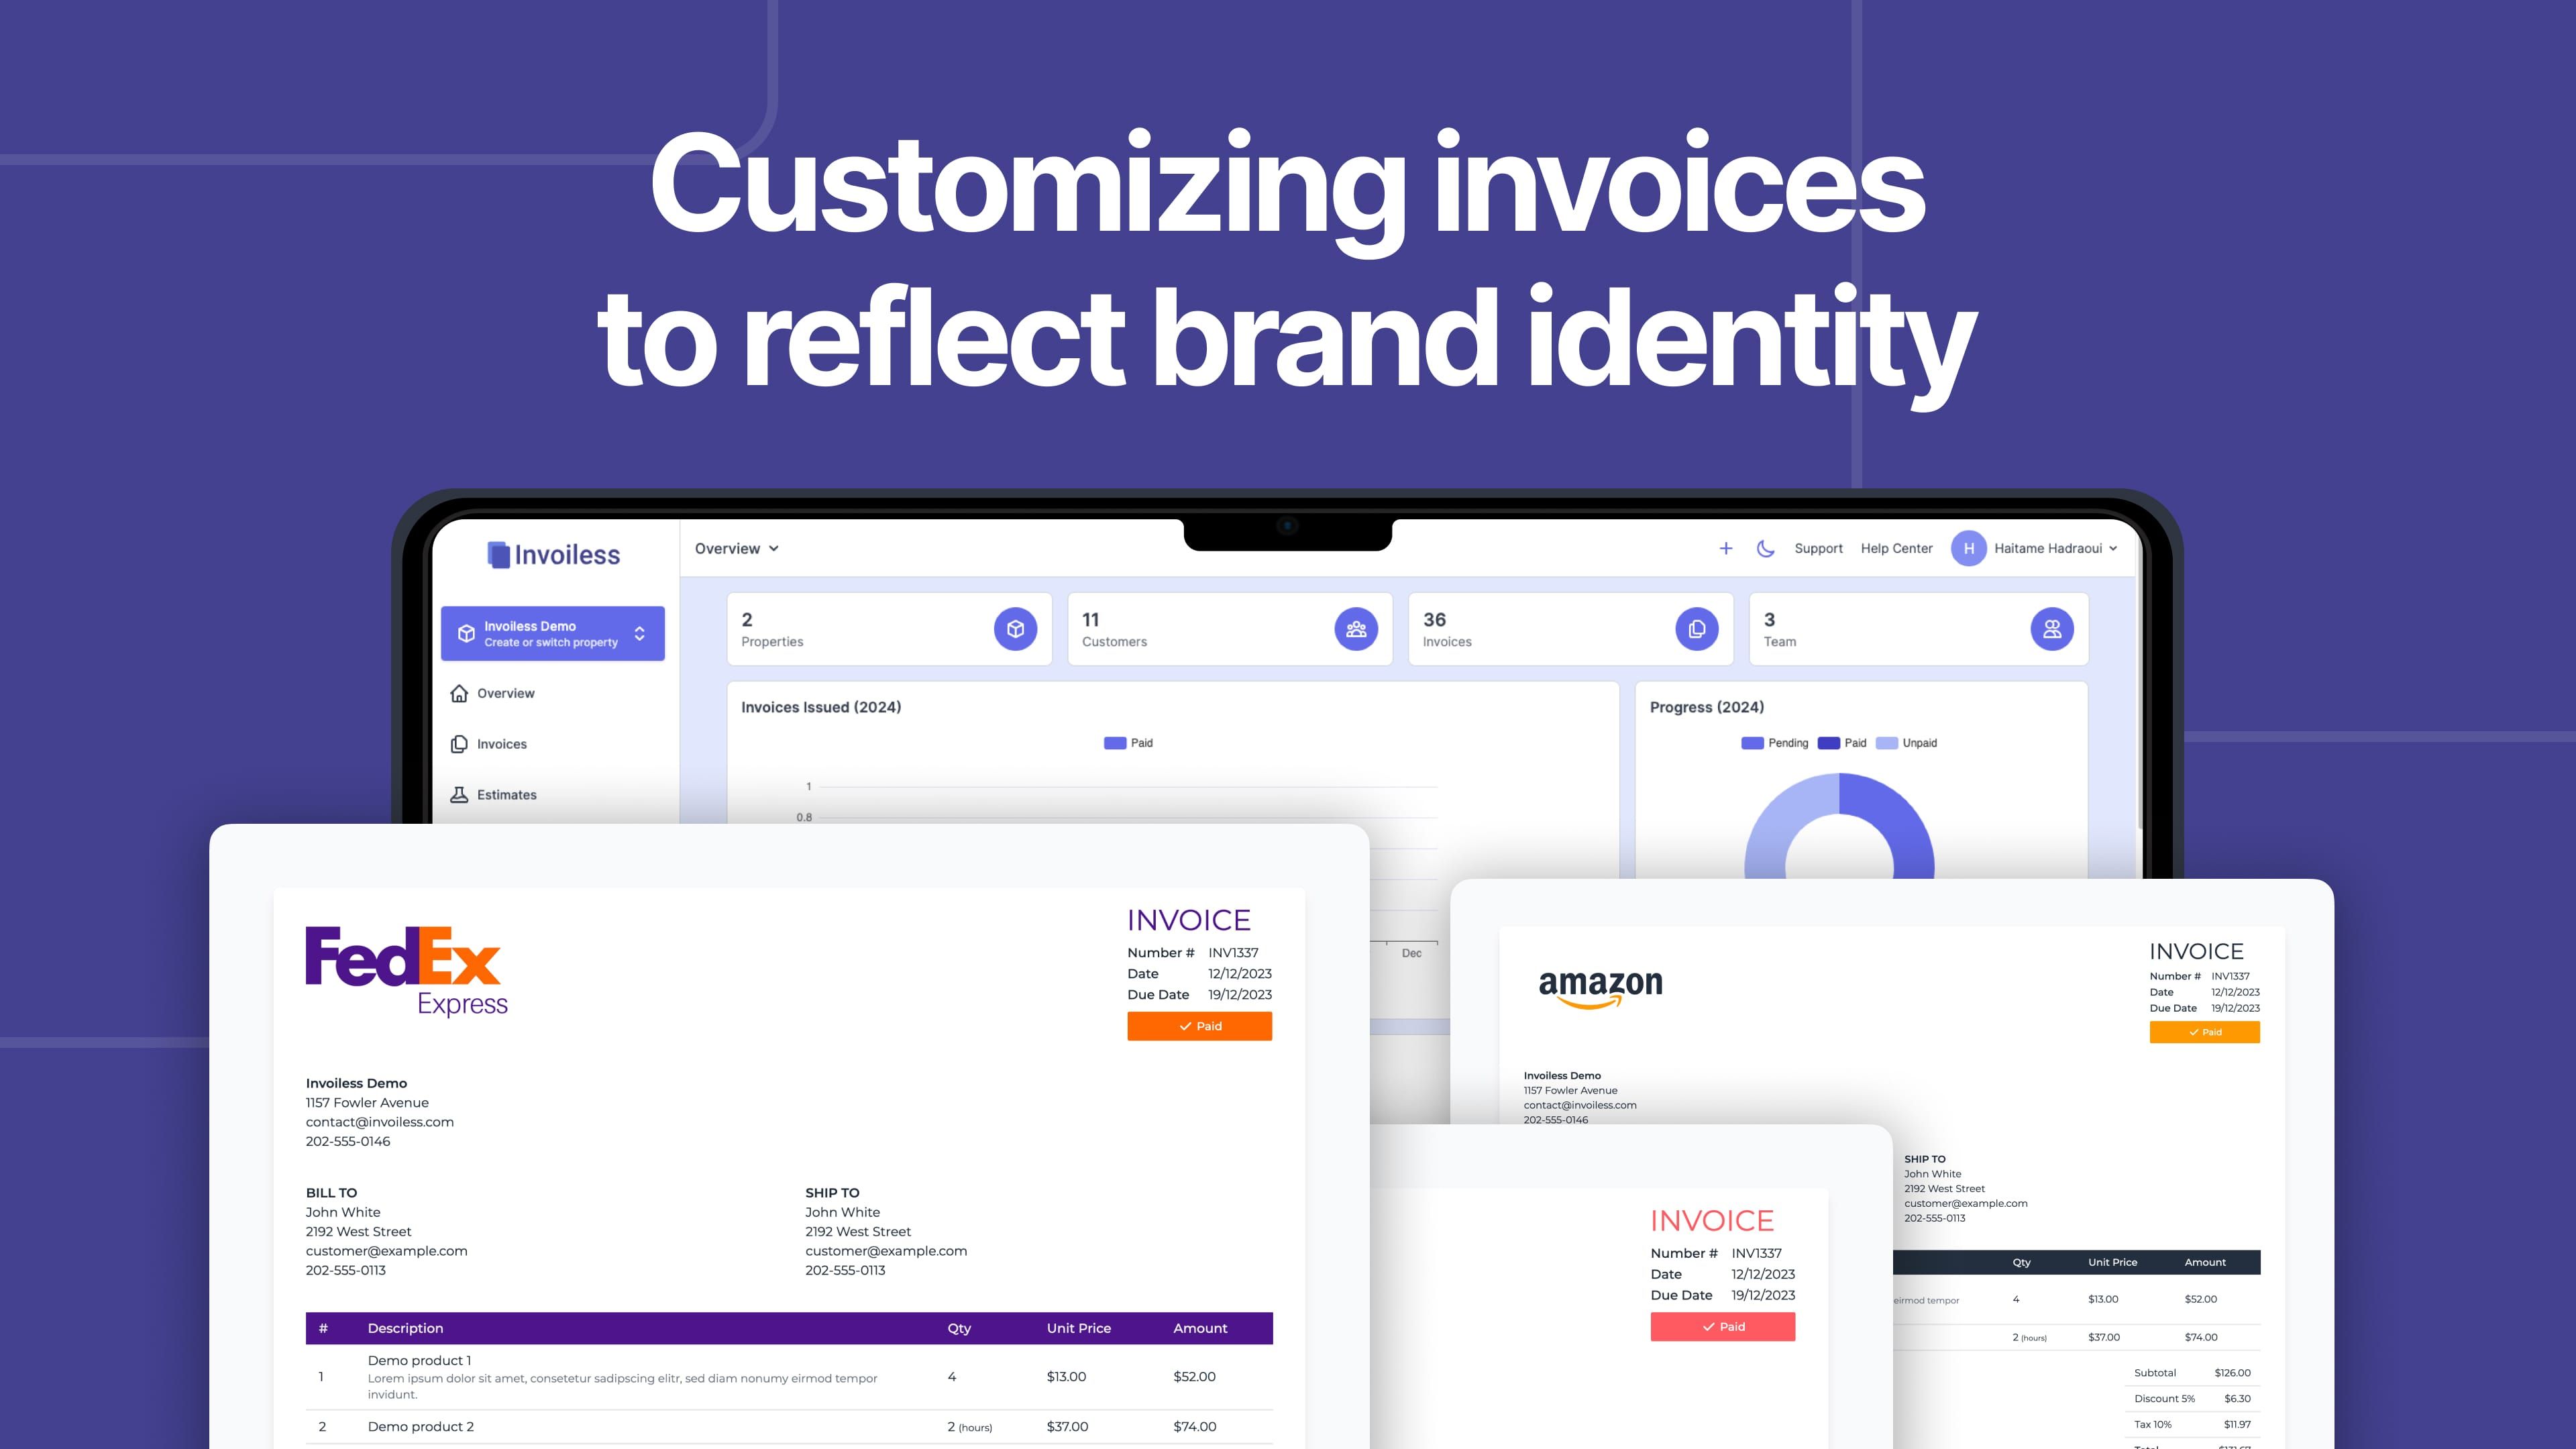 How to Customize Invoices to Reflect Brand Identity